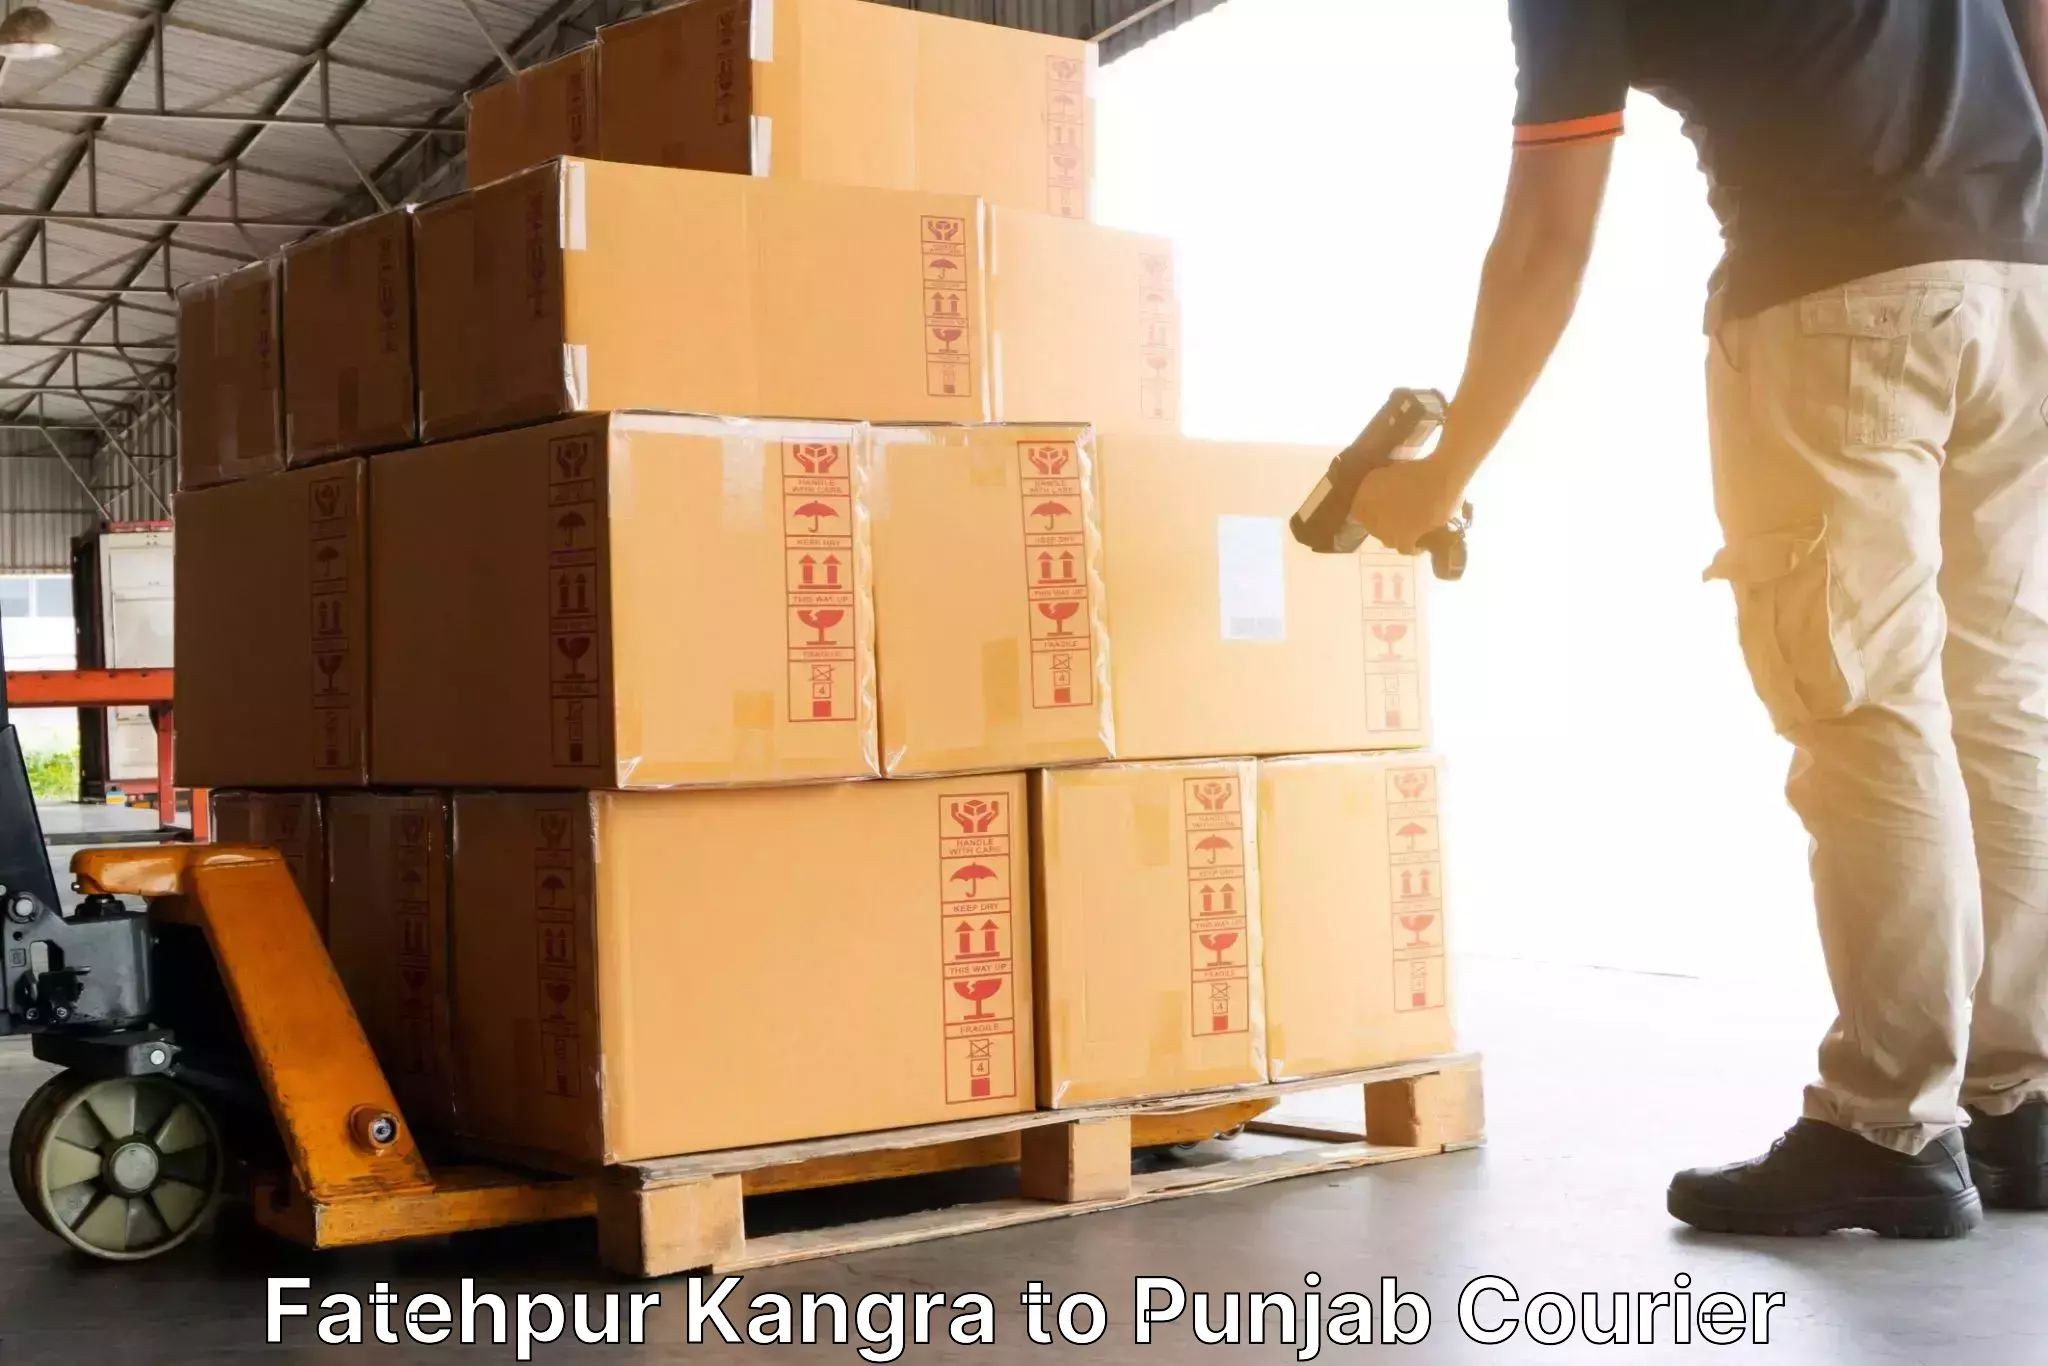 Express delivery capabilities Fatehpur Kangra to Sultanpur Lodhi